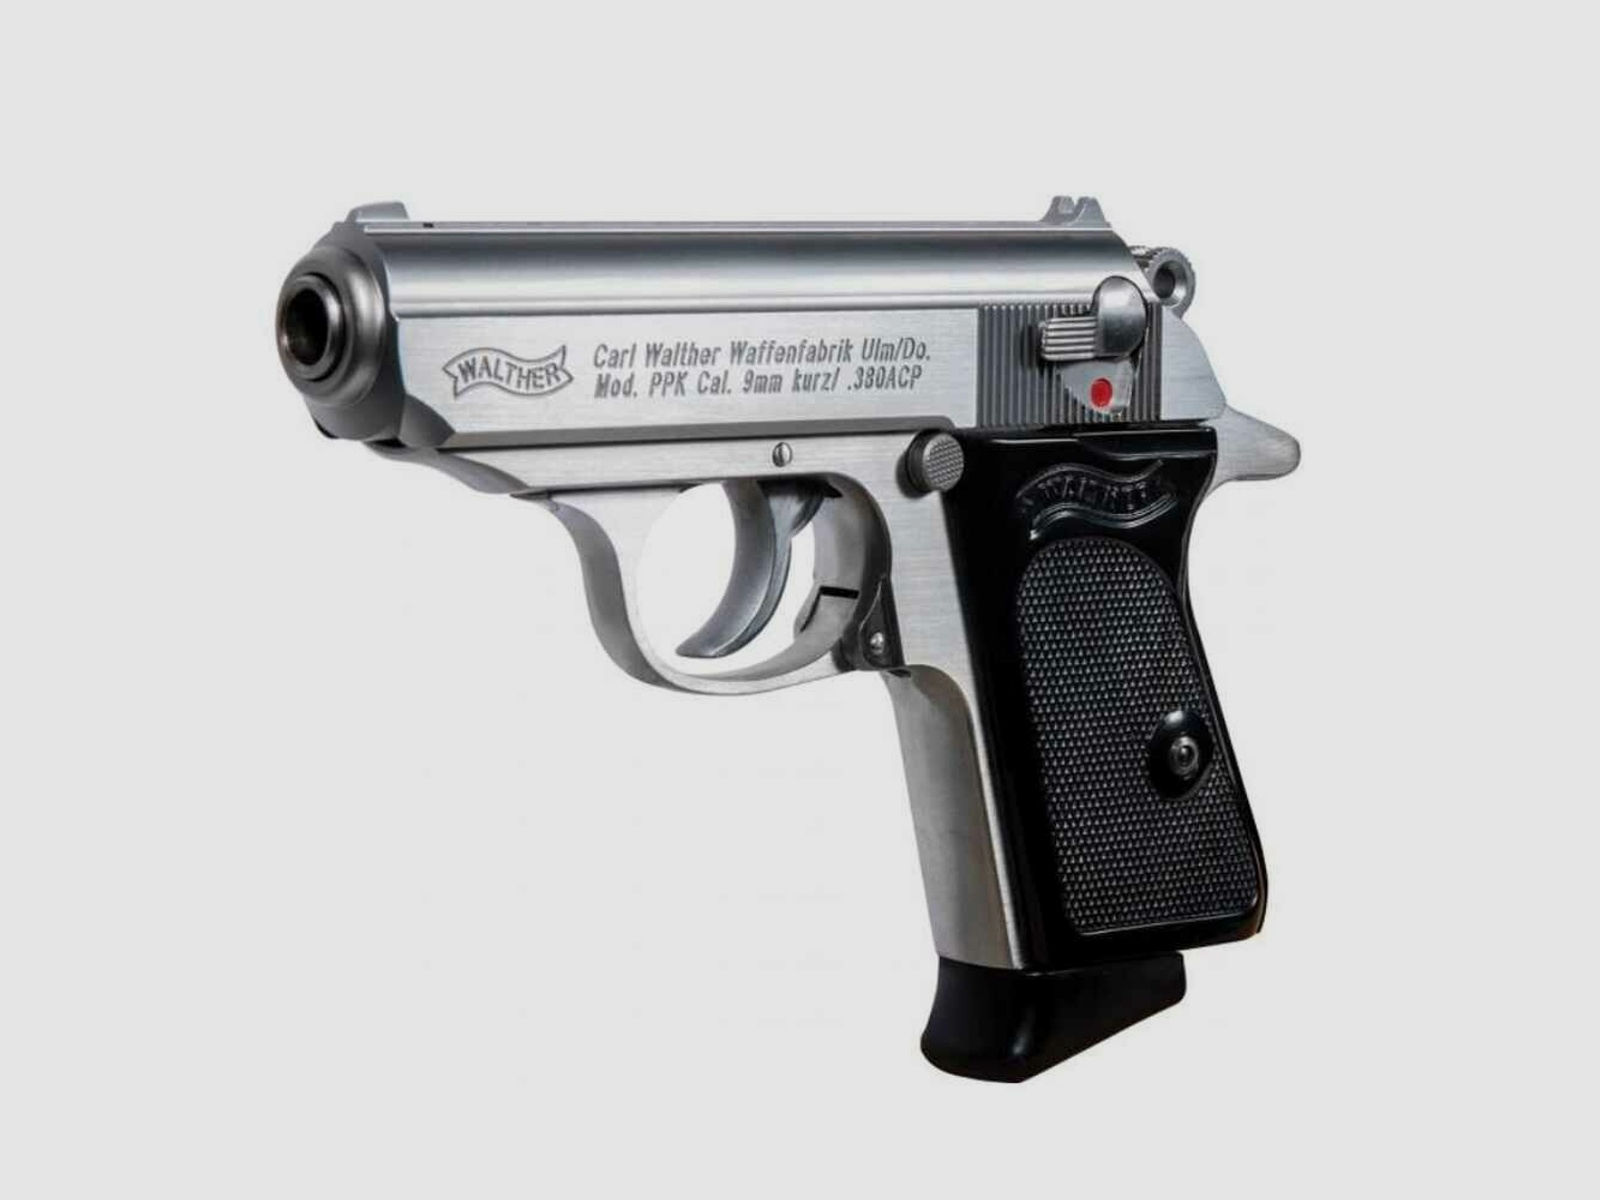 Pistole Walther PPK, stainless, 9mm kurz / .380 ACP